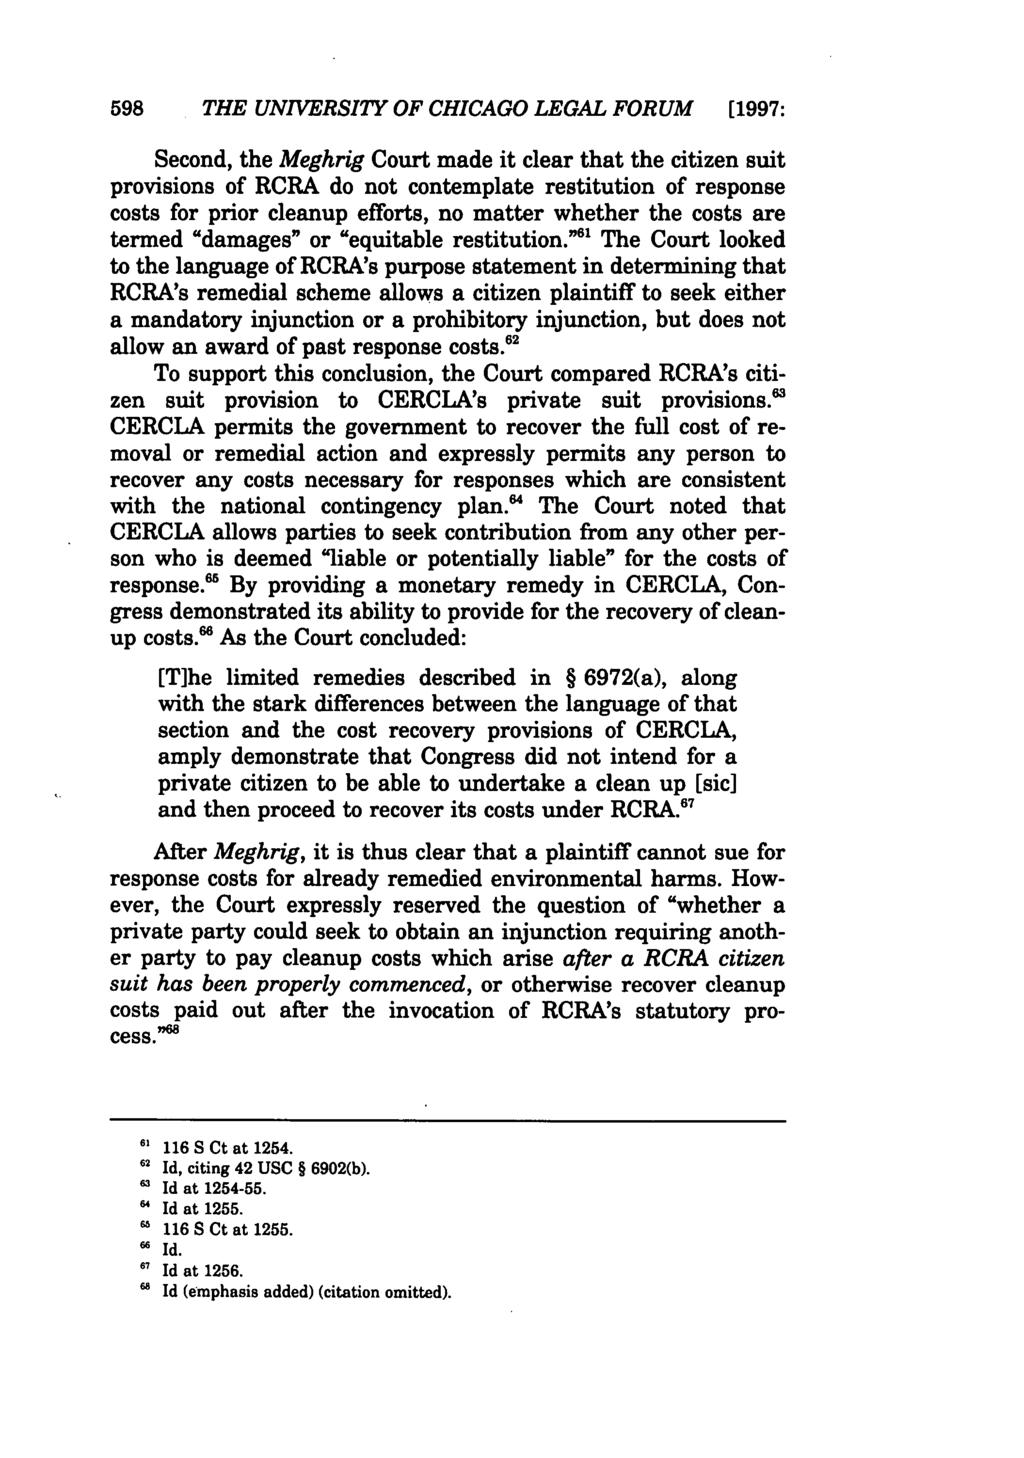 598 THE UNIVERSITY OF CHICAGO LEGAL FORUM [1997: Second, the Meghrig Court made it clear that the citizen suit provisions of RCRA do not contemplate restitution of response costs for prior cleanup